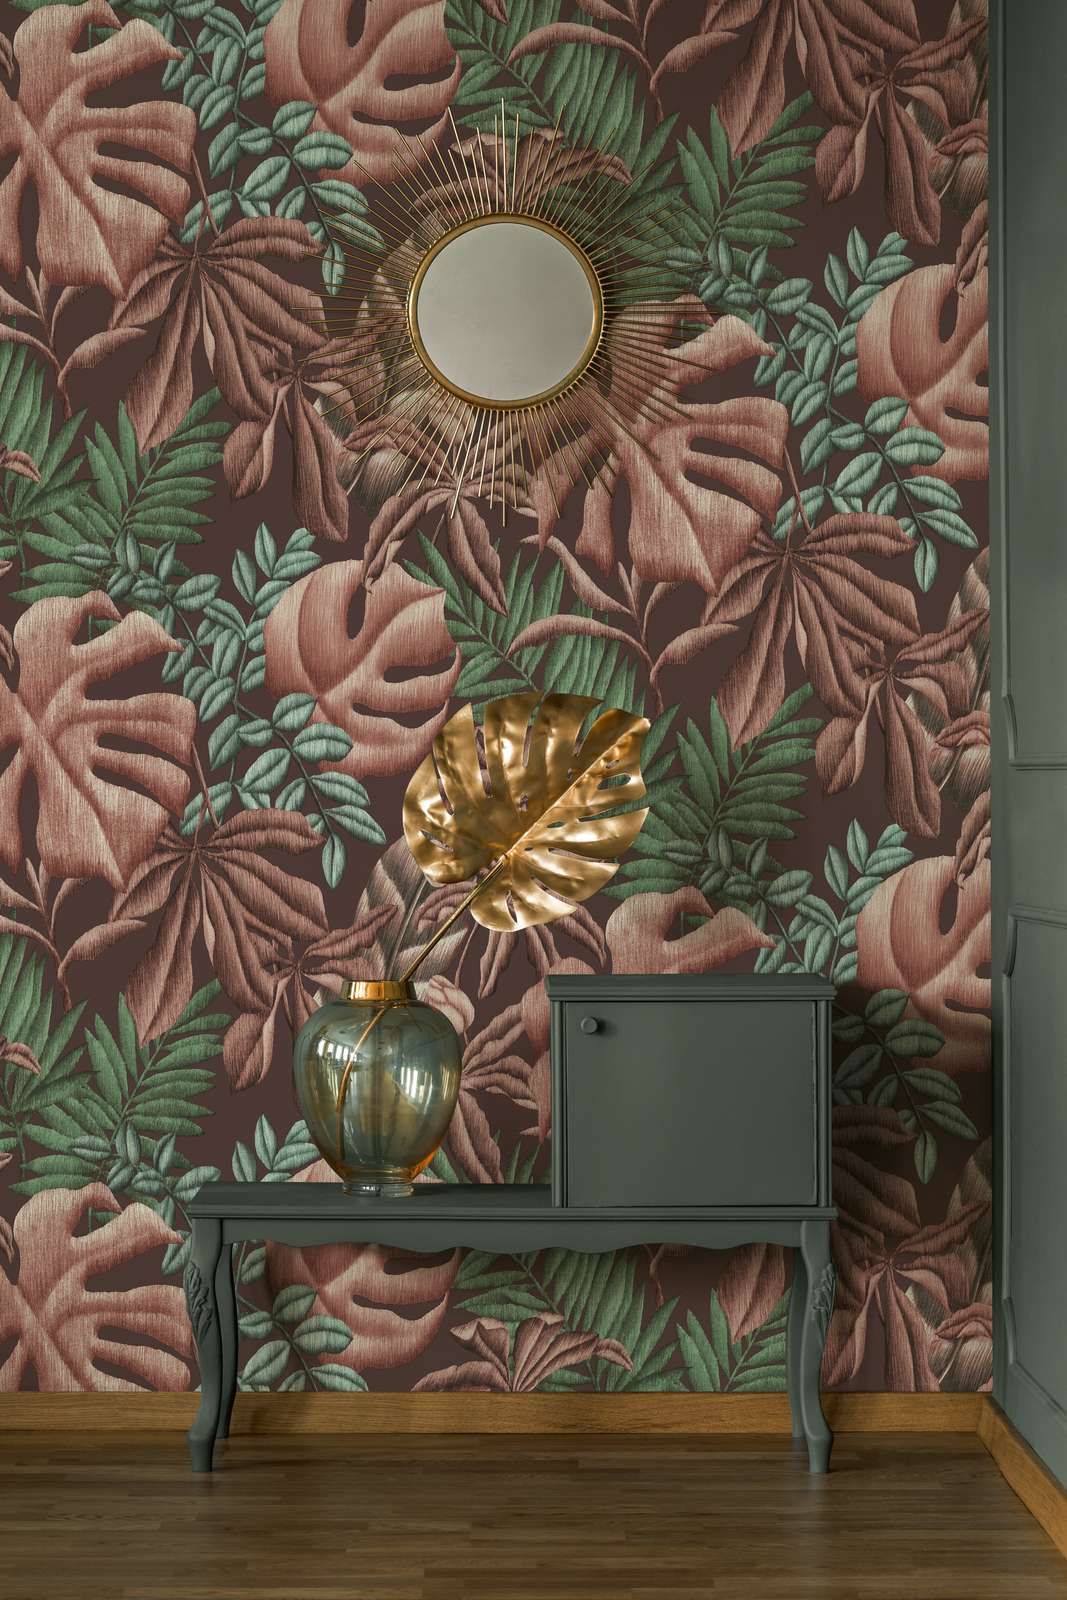             Floral non-woven wallpaper with leaves fern & banana leaves - pink, green, turquoise
        